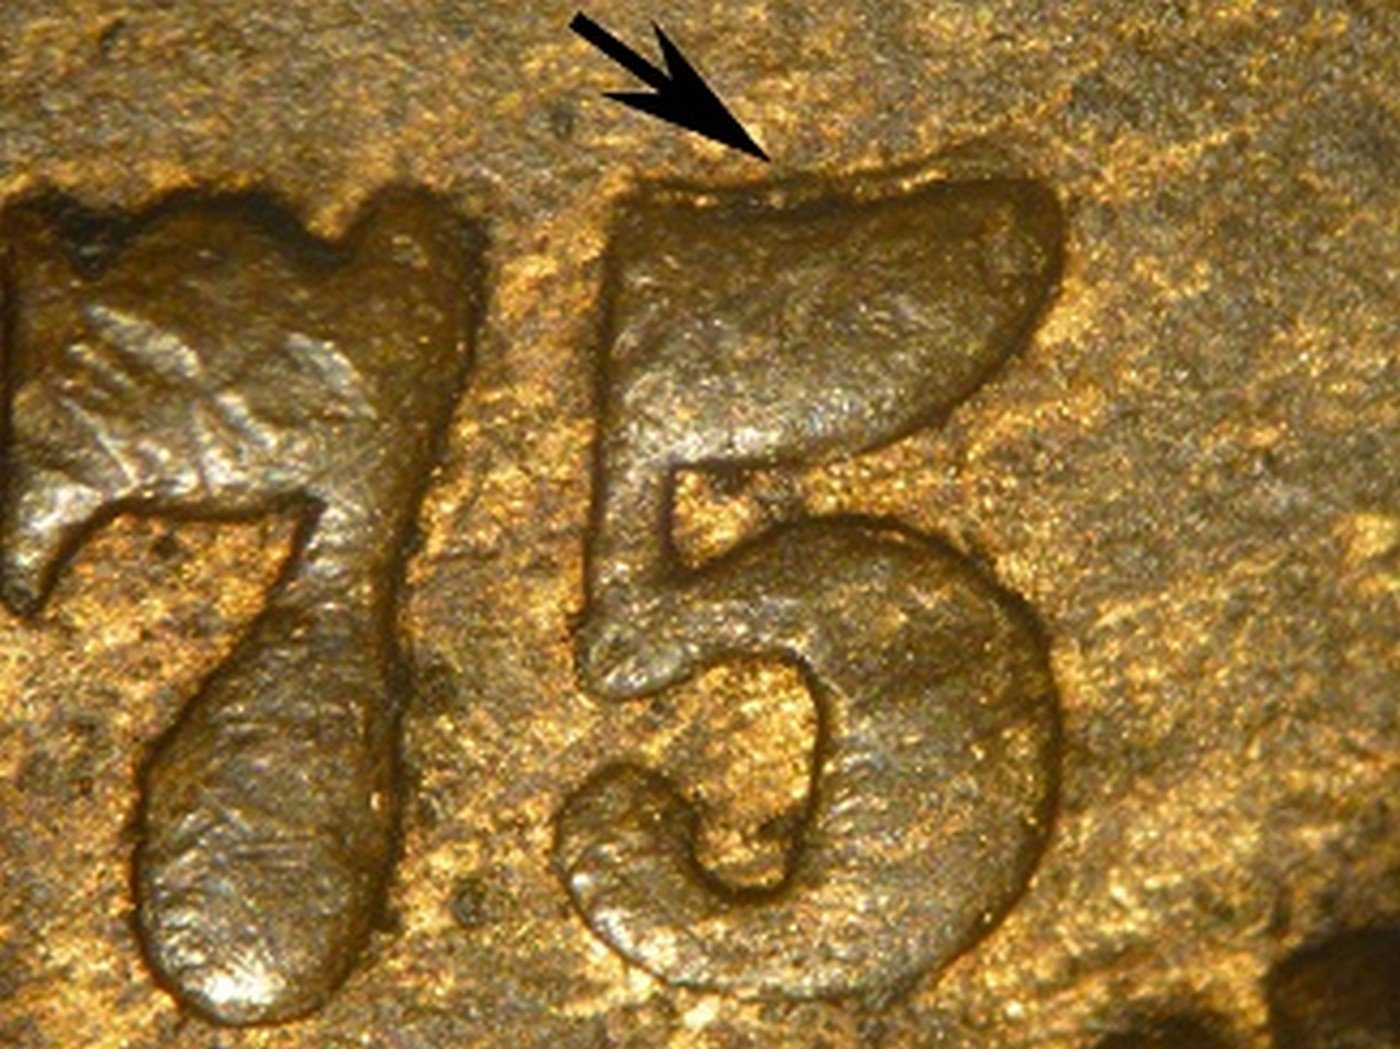 1875 RPD-011 - Indian Head Penny - Photo by David Poliquin